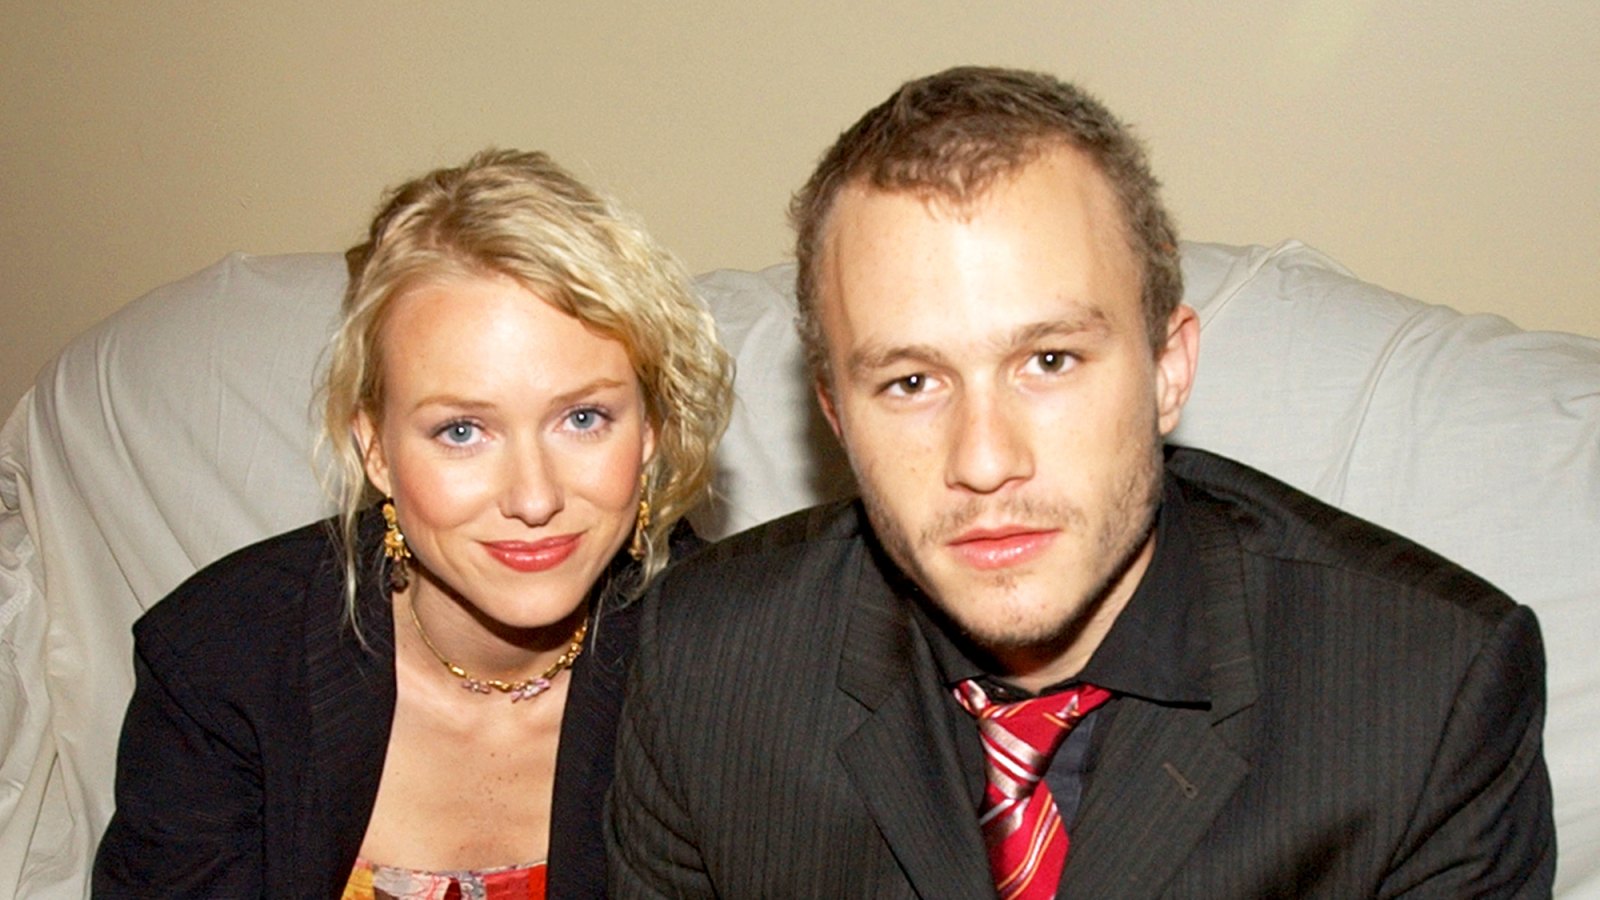 Naomi Watts and Heath Ledger attend the 2002 GQ Men of the Year Awards in New York City.